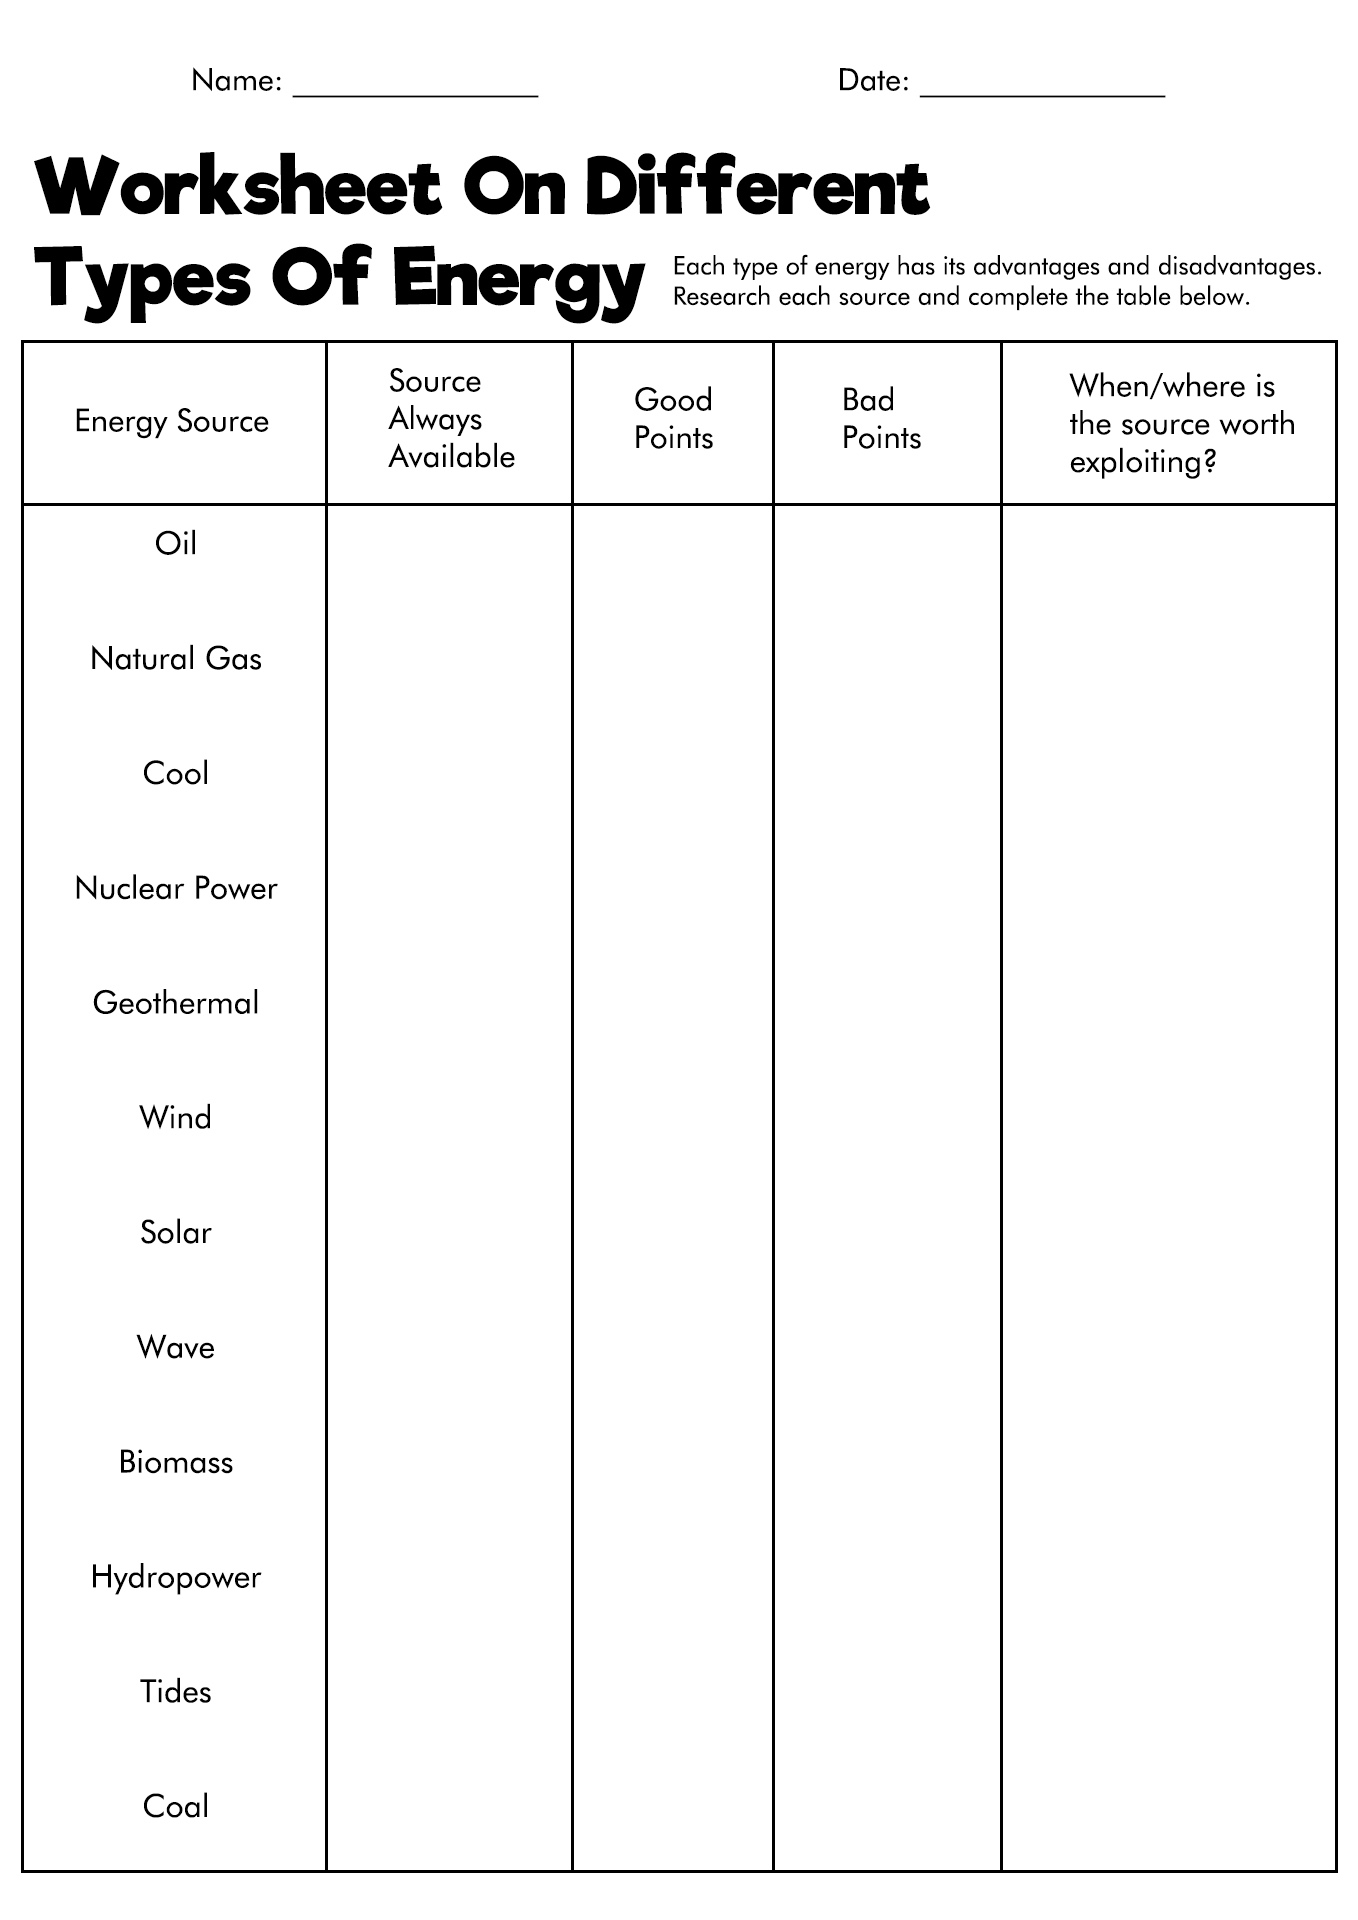 Science Heat Energy Worksheets with Answer